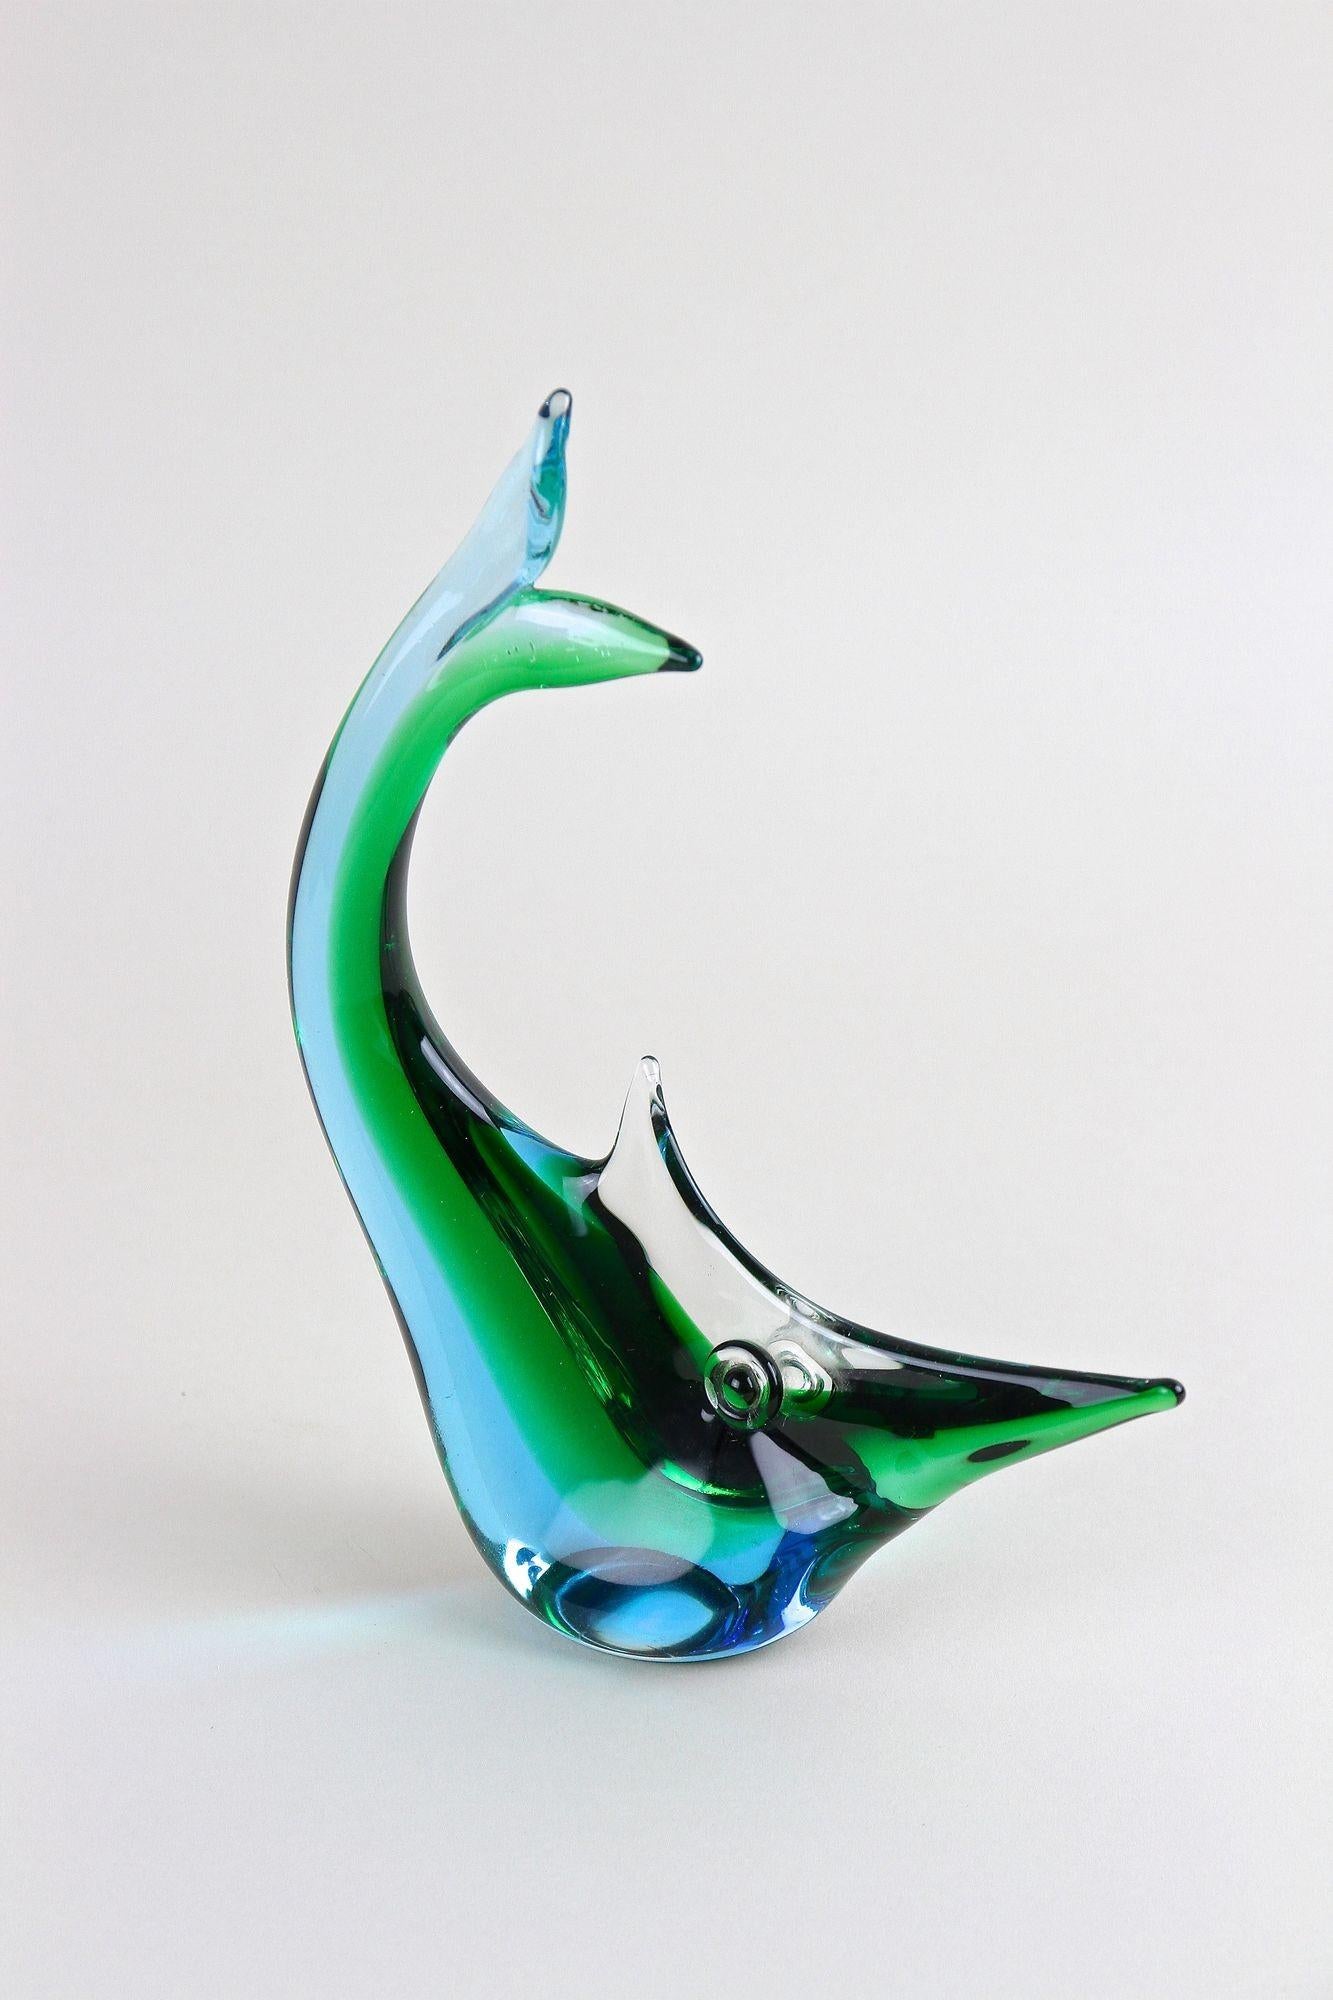 Extraordinary designed, colorful Murano glass fish from the period around 1970. Another highly decorative piece in our fine Murano glass selection. This fantastic Murano glass fish shows the incredible craftsmanship of these highly skilled artist